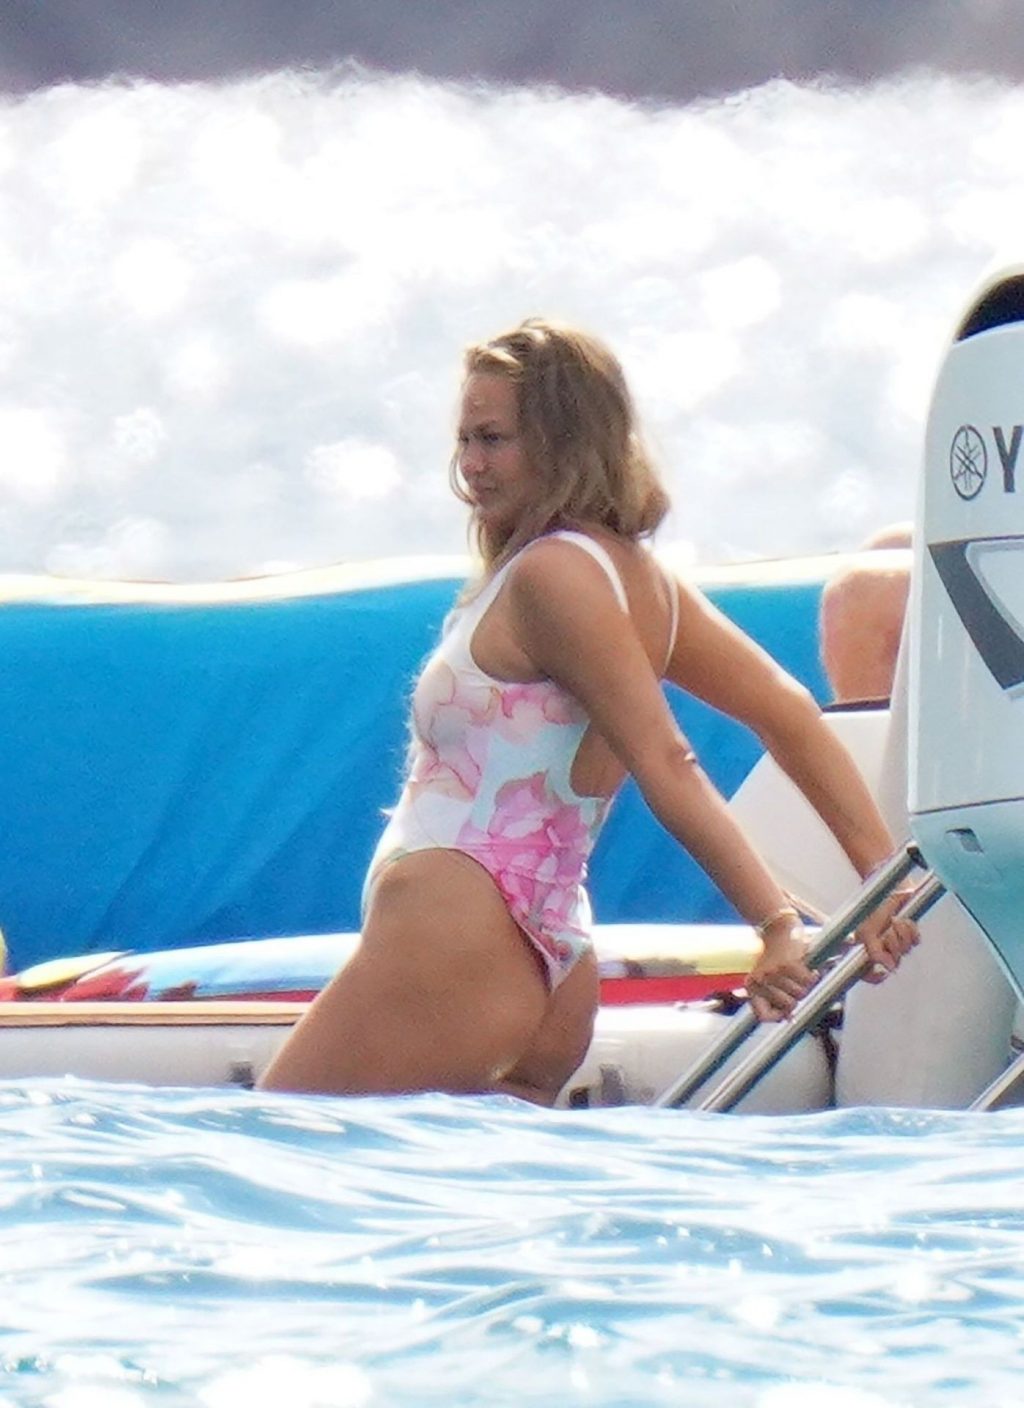 John Legend &amp; Chrissy Teigen Have an Active Day Out on the Water in St Barts (16 Photos)